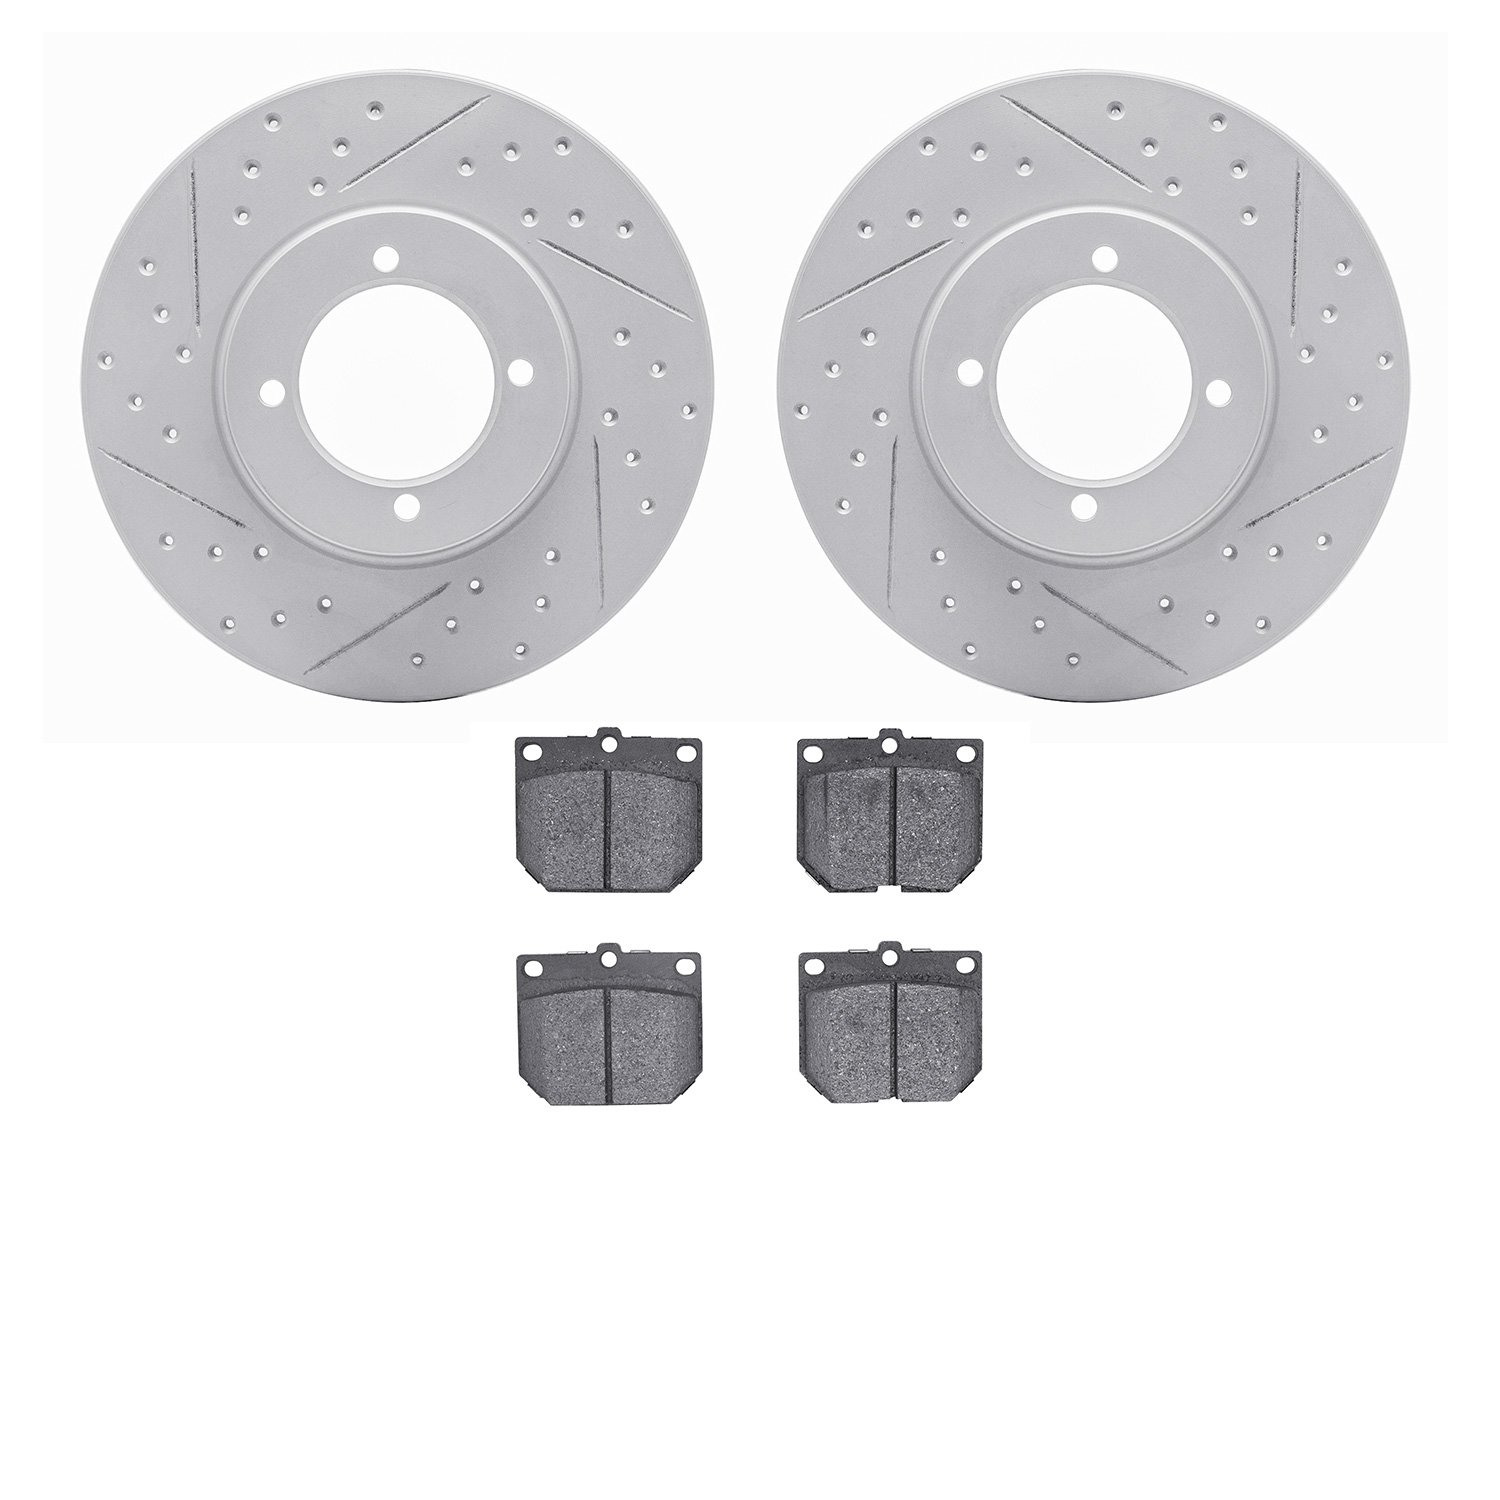 2502-67000 Geoperformance Drilled/Slotted Rotors w/5000 Advanced Brake Pads Kit, 1970-1973 Infiniti/Nissan, Position: Front